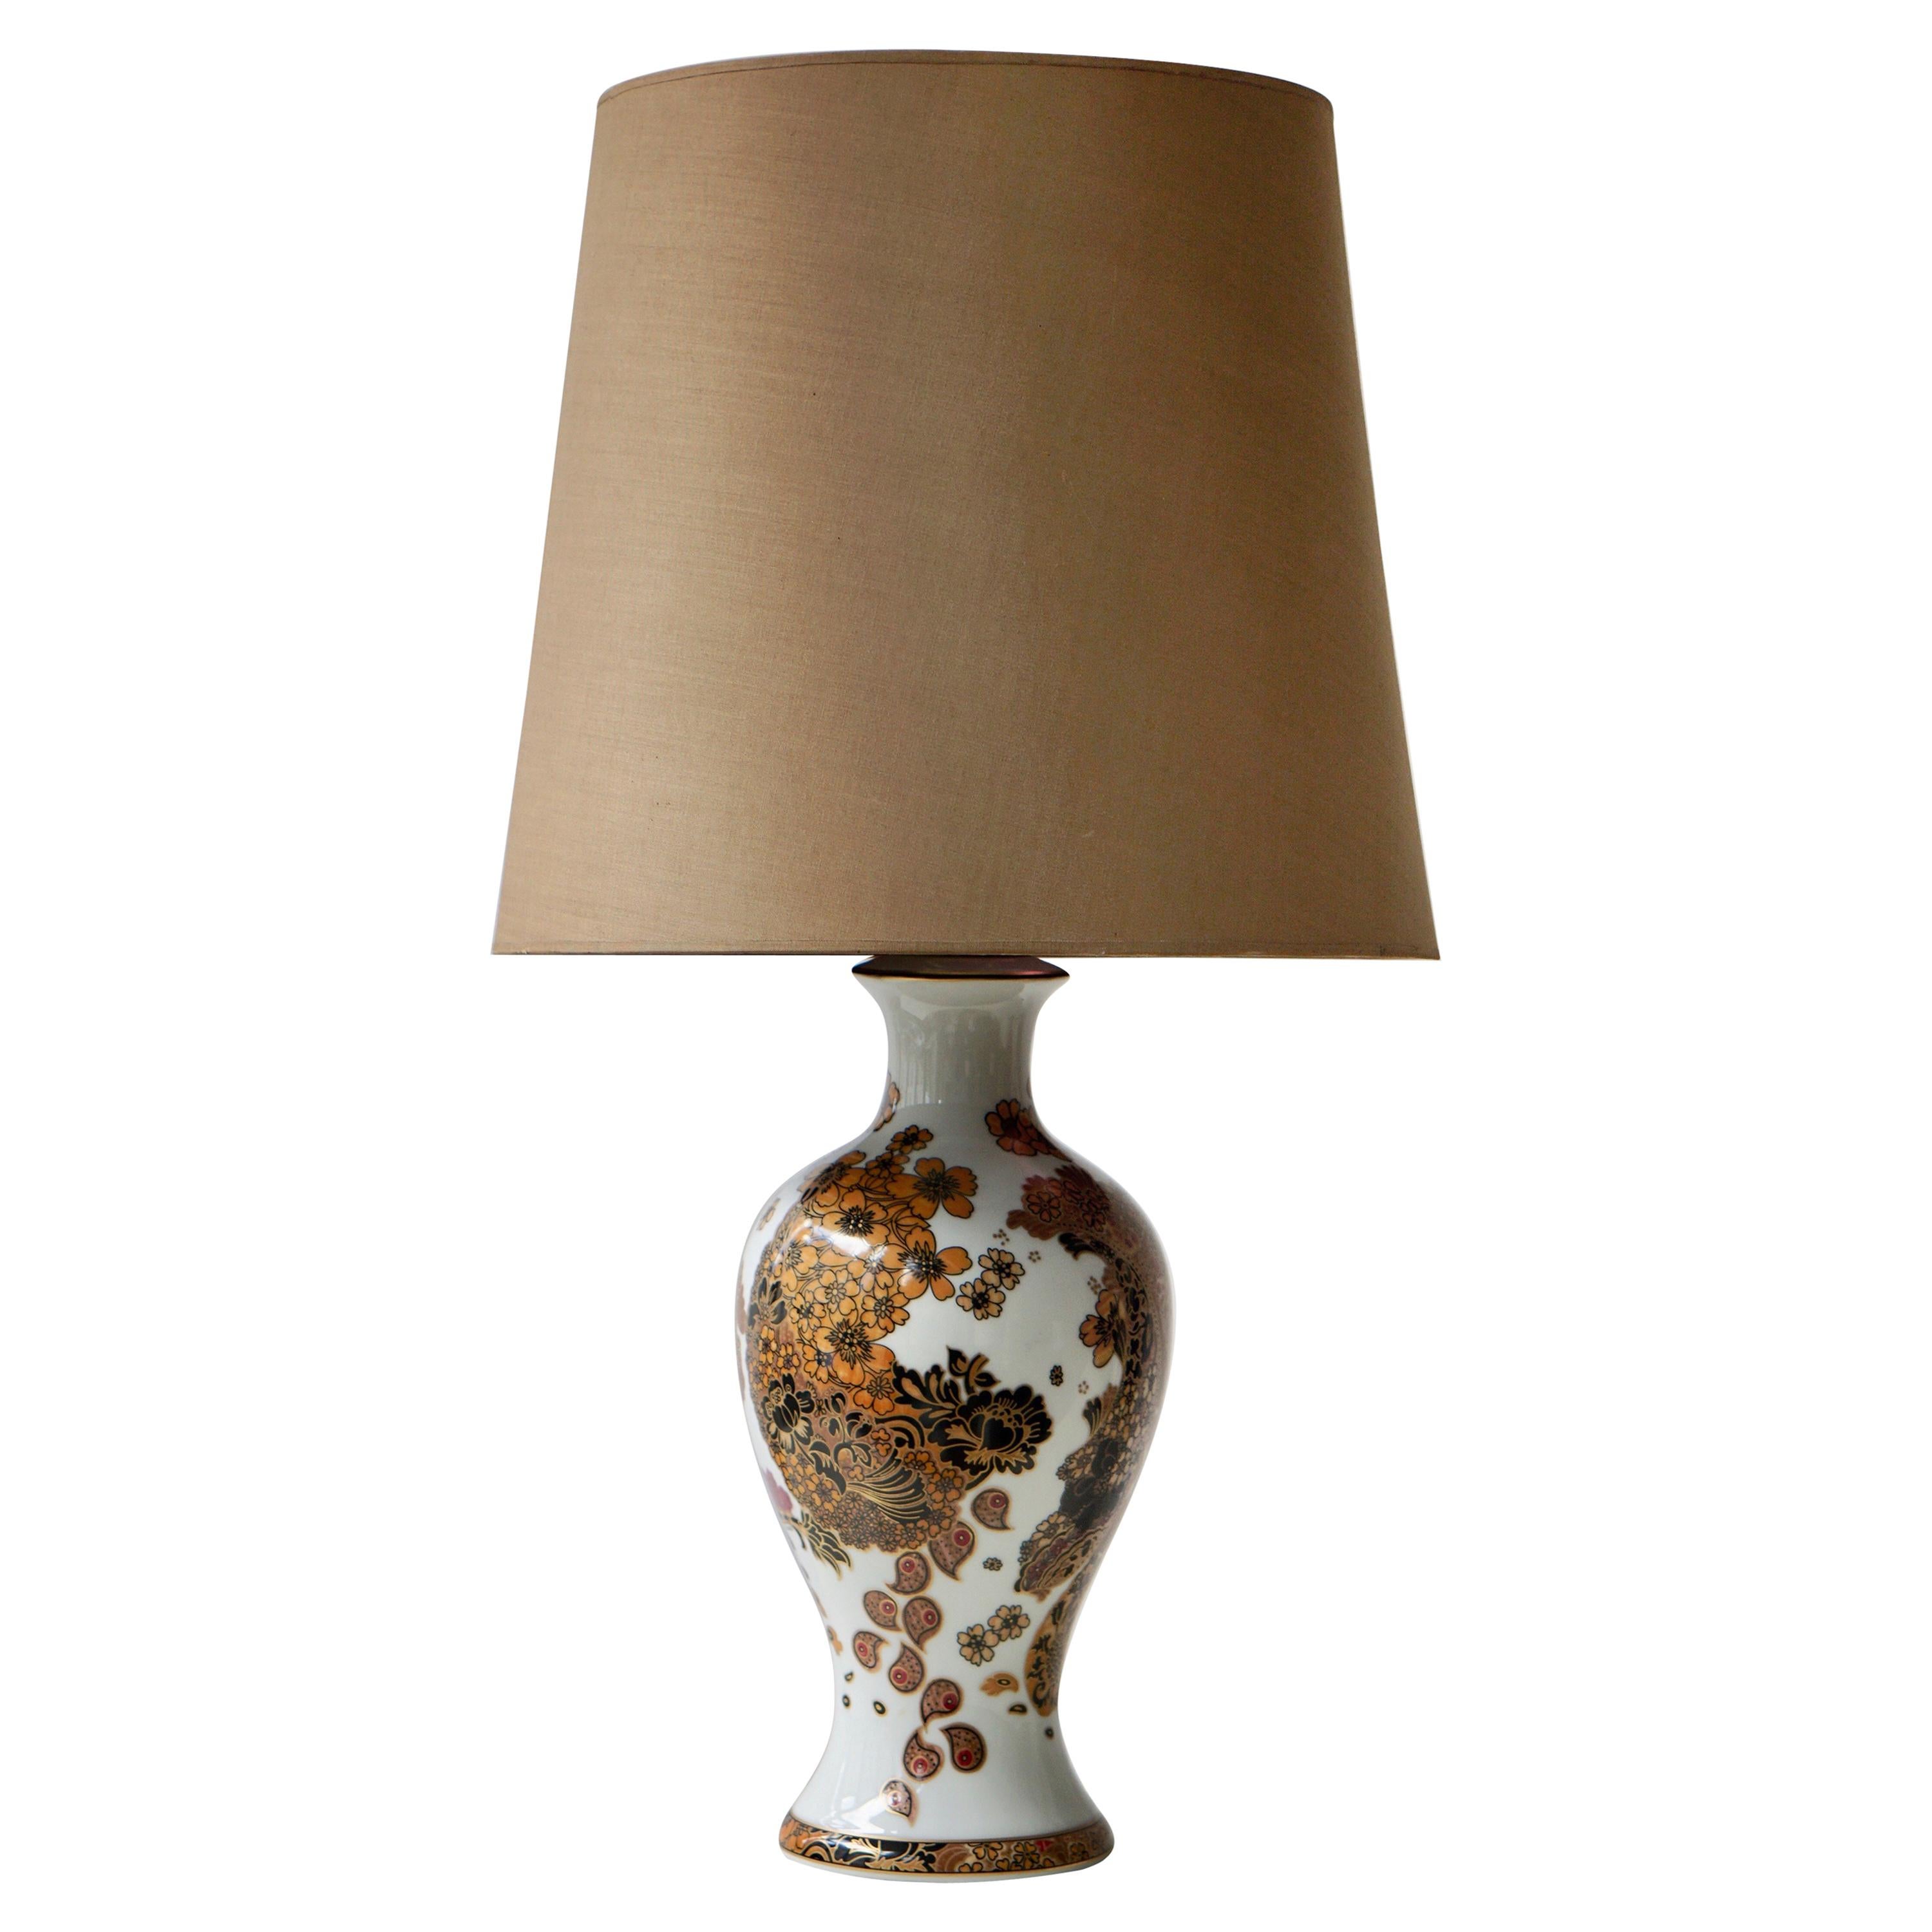 One Porcelain Table Lamp For Sale